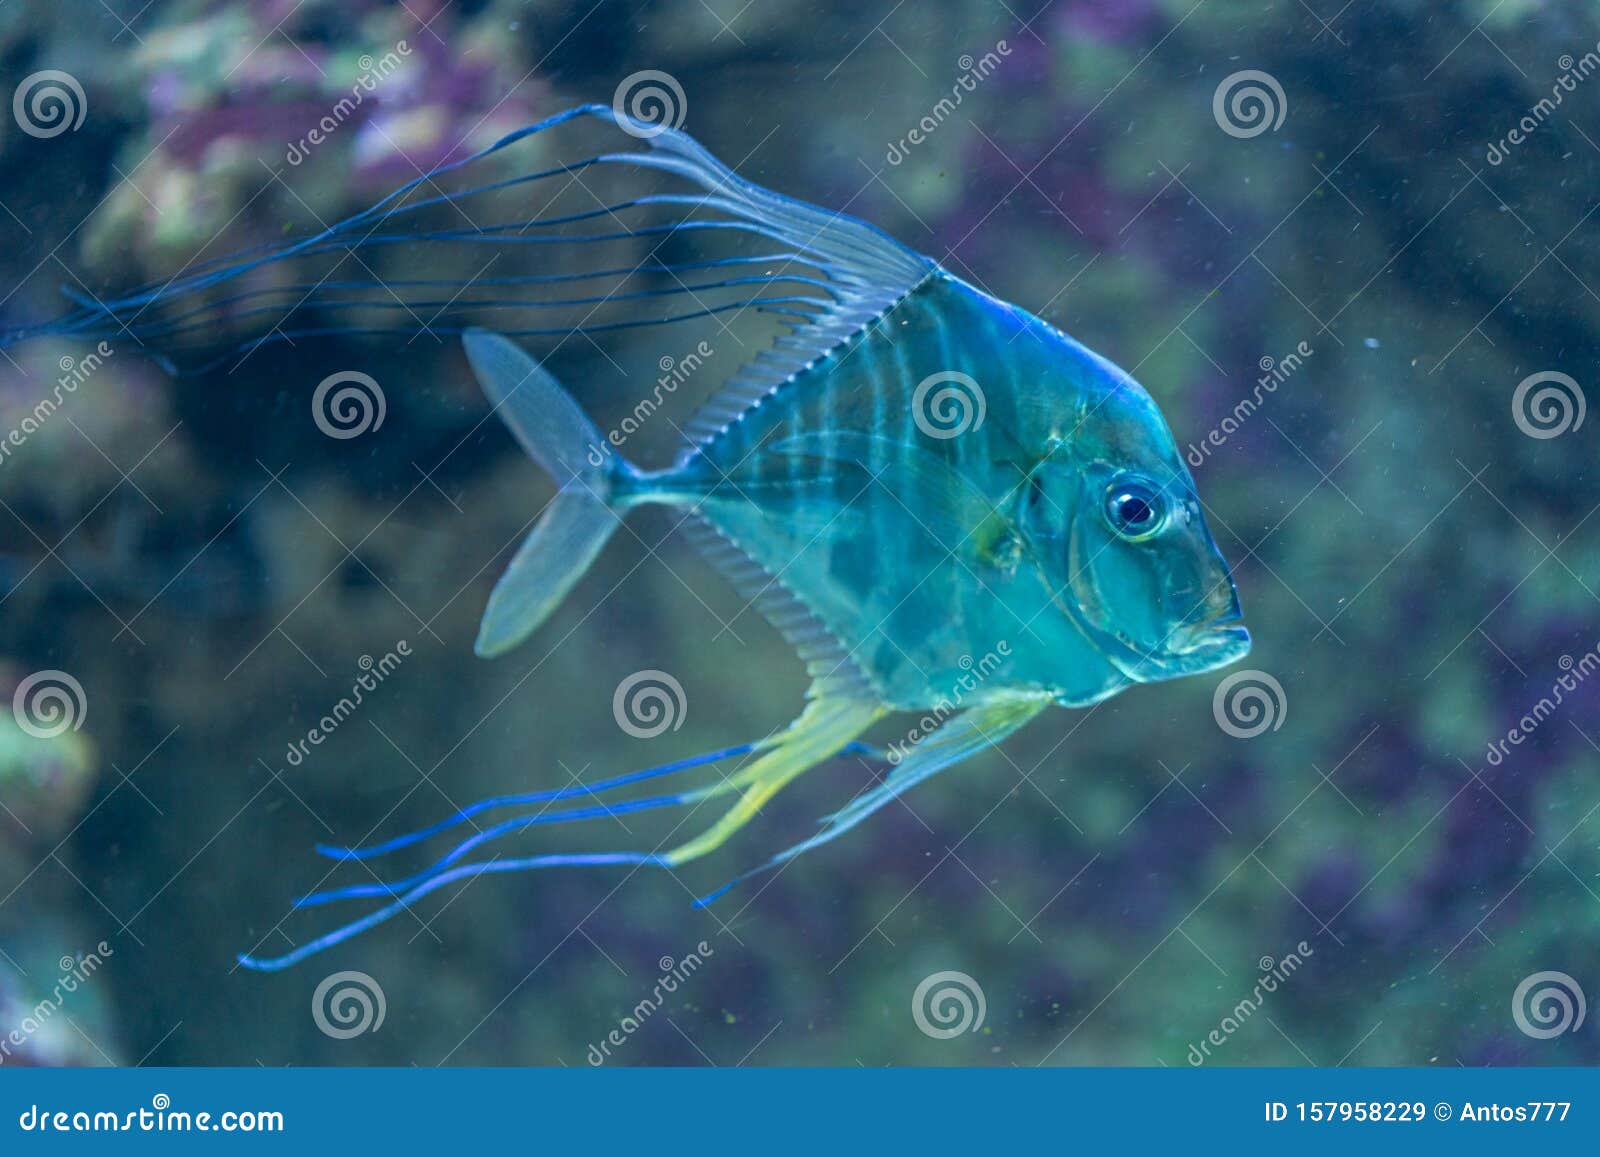 Indian Threadfish Photos and Images & Pictures